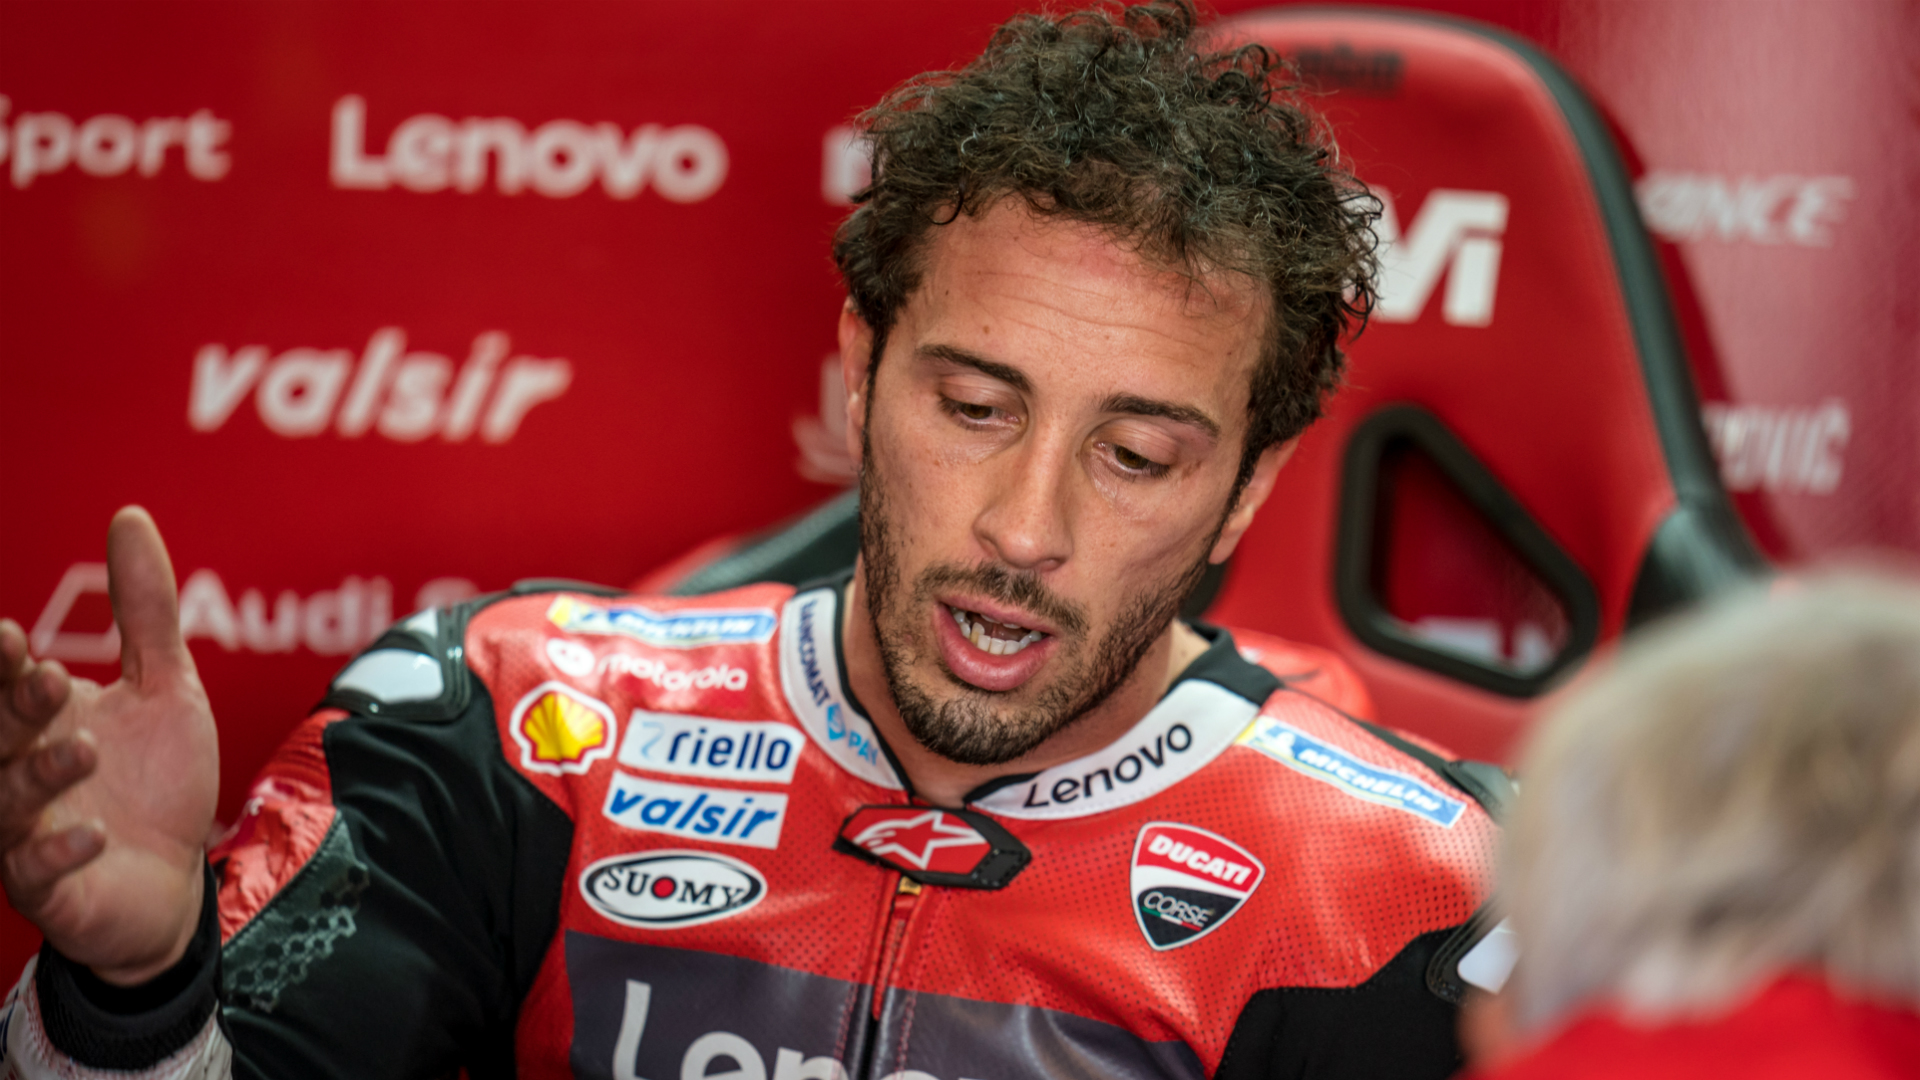 Andrea Dovizioso says his relationship with Gigi Dall'Igna was reduced to "zero" and thinks the Ducati general manager has too much power.